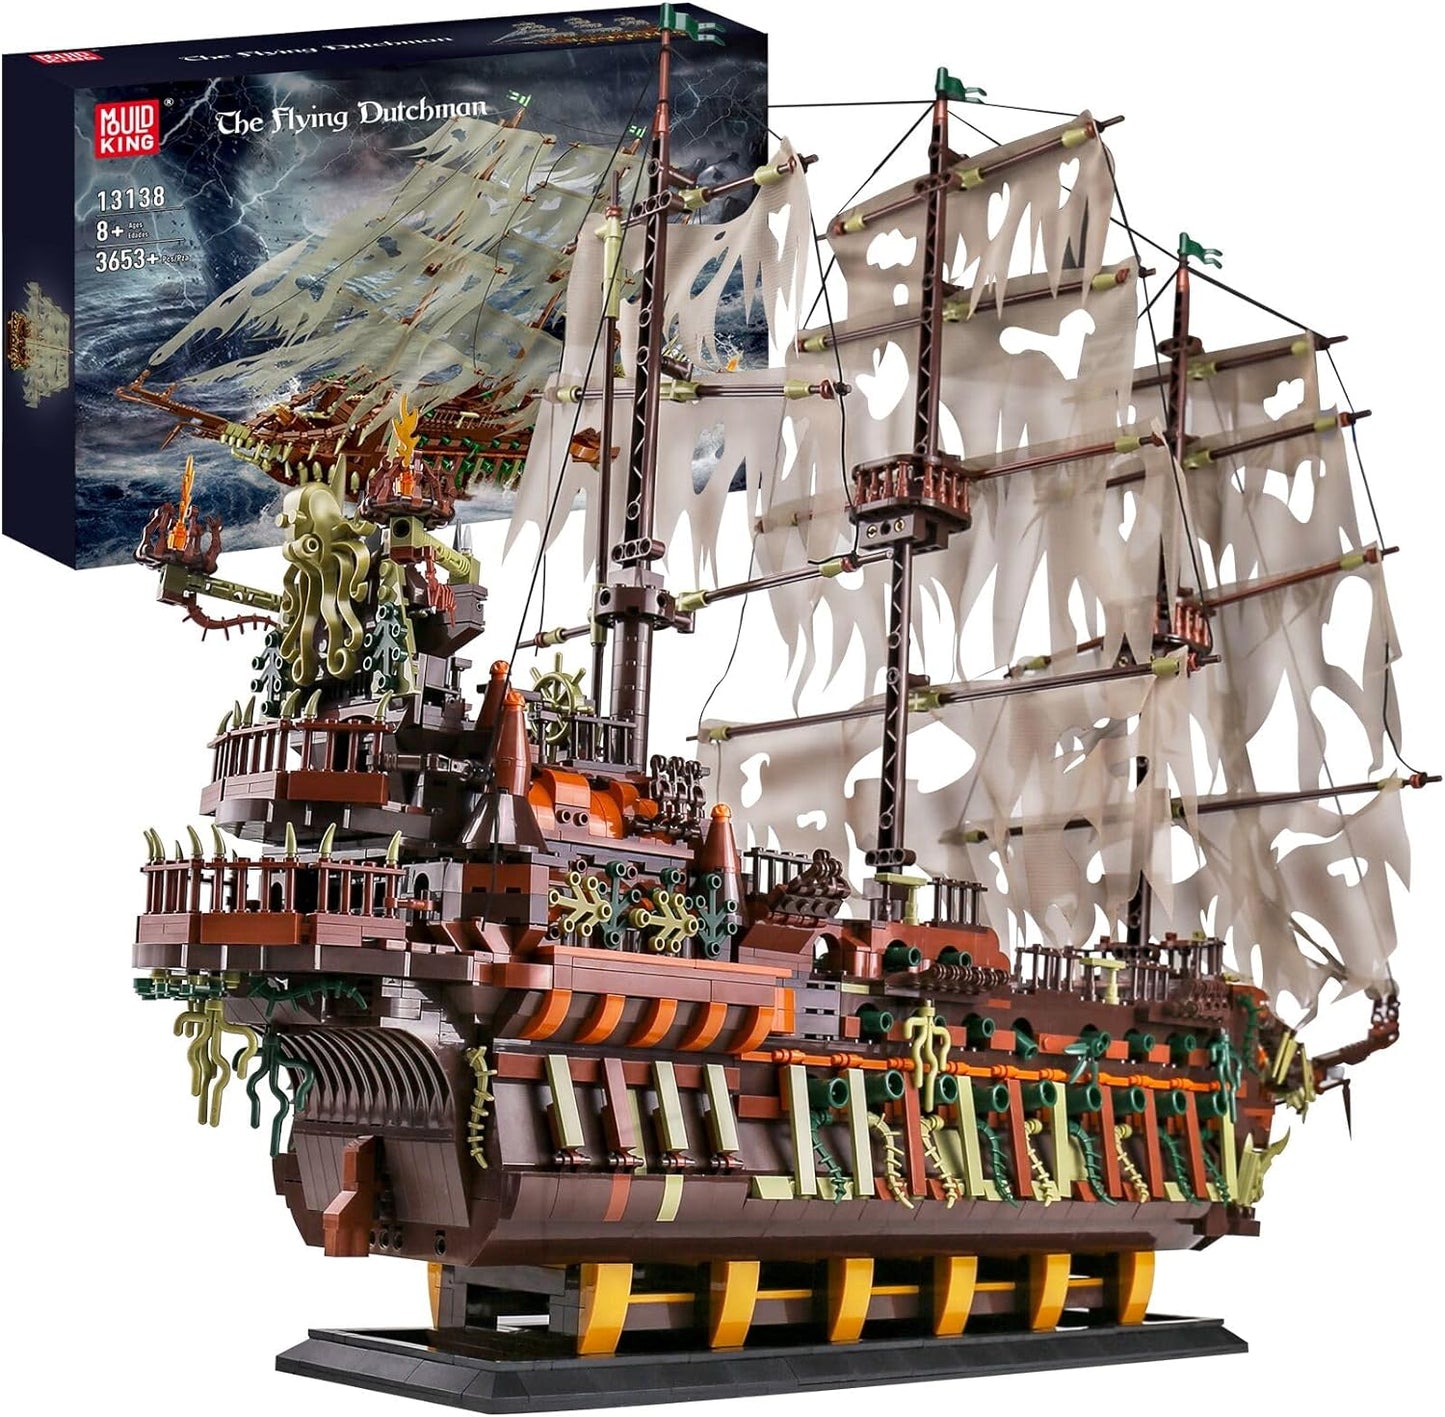 Mould King Large Pirates Ship Model Building Kits, MOC Dutchman Building Block Pirate Ship Construction Set to Build, Toys Gift for Kids Age 8+/Adult Collections Enthusiasts (3700+Pieces)